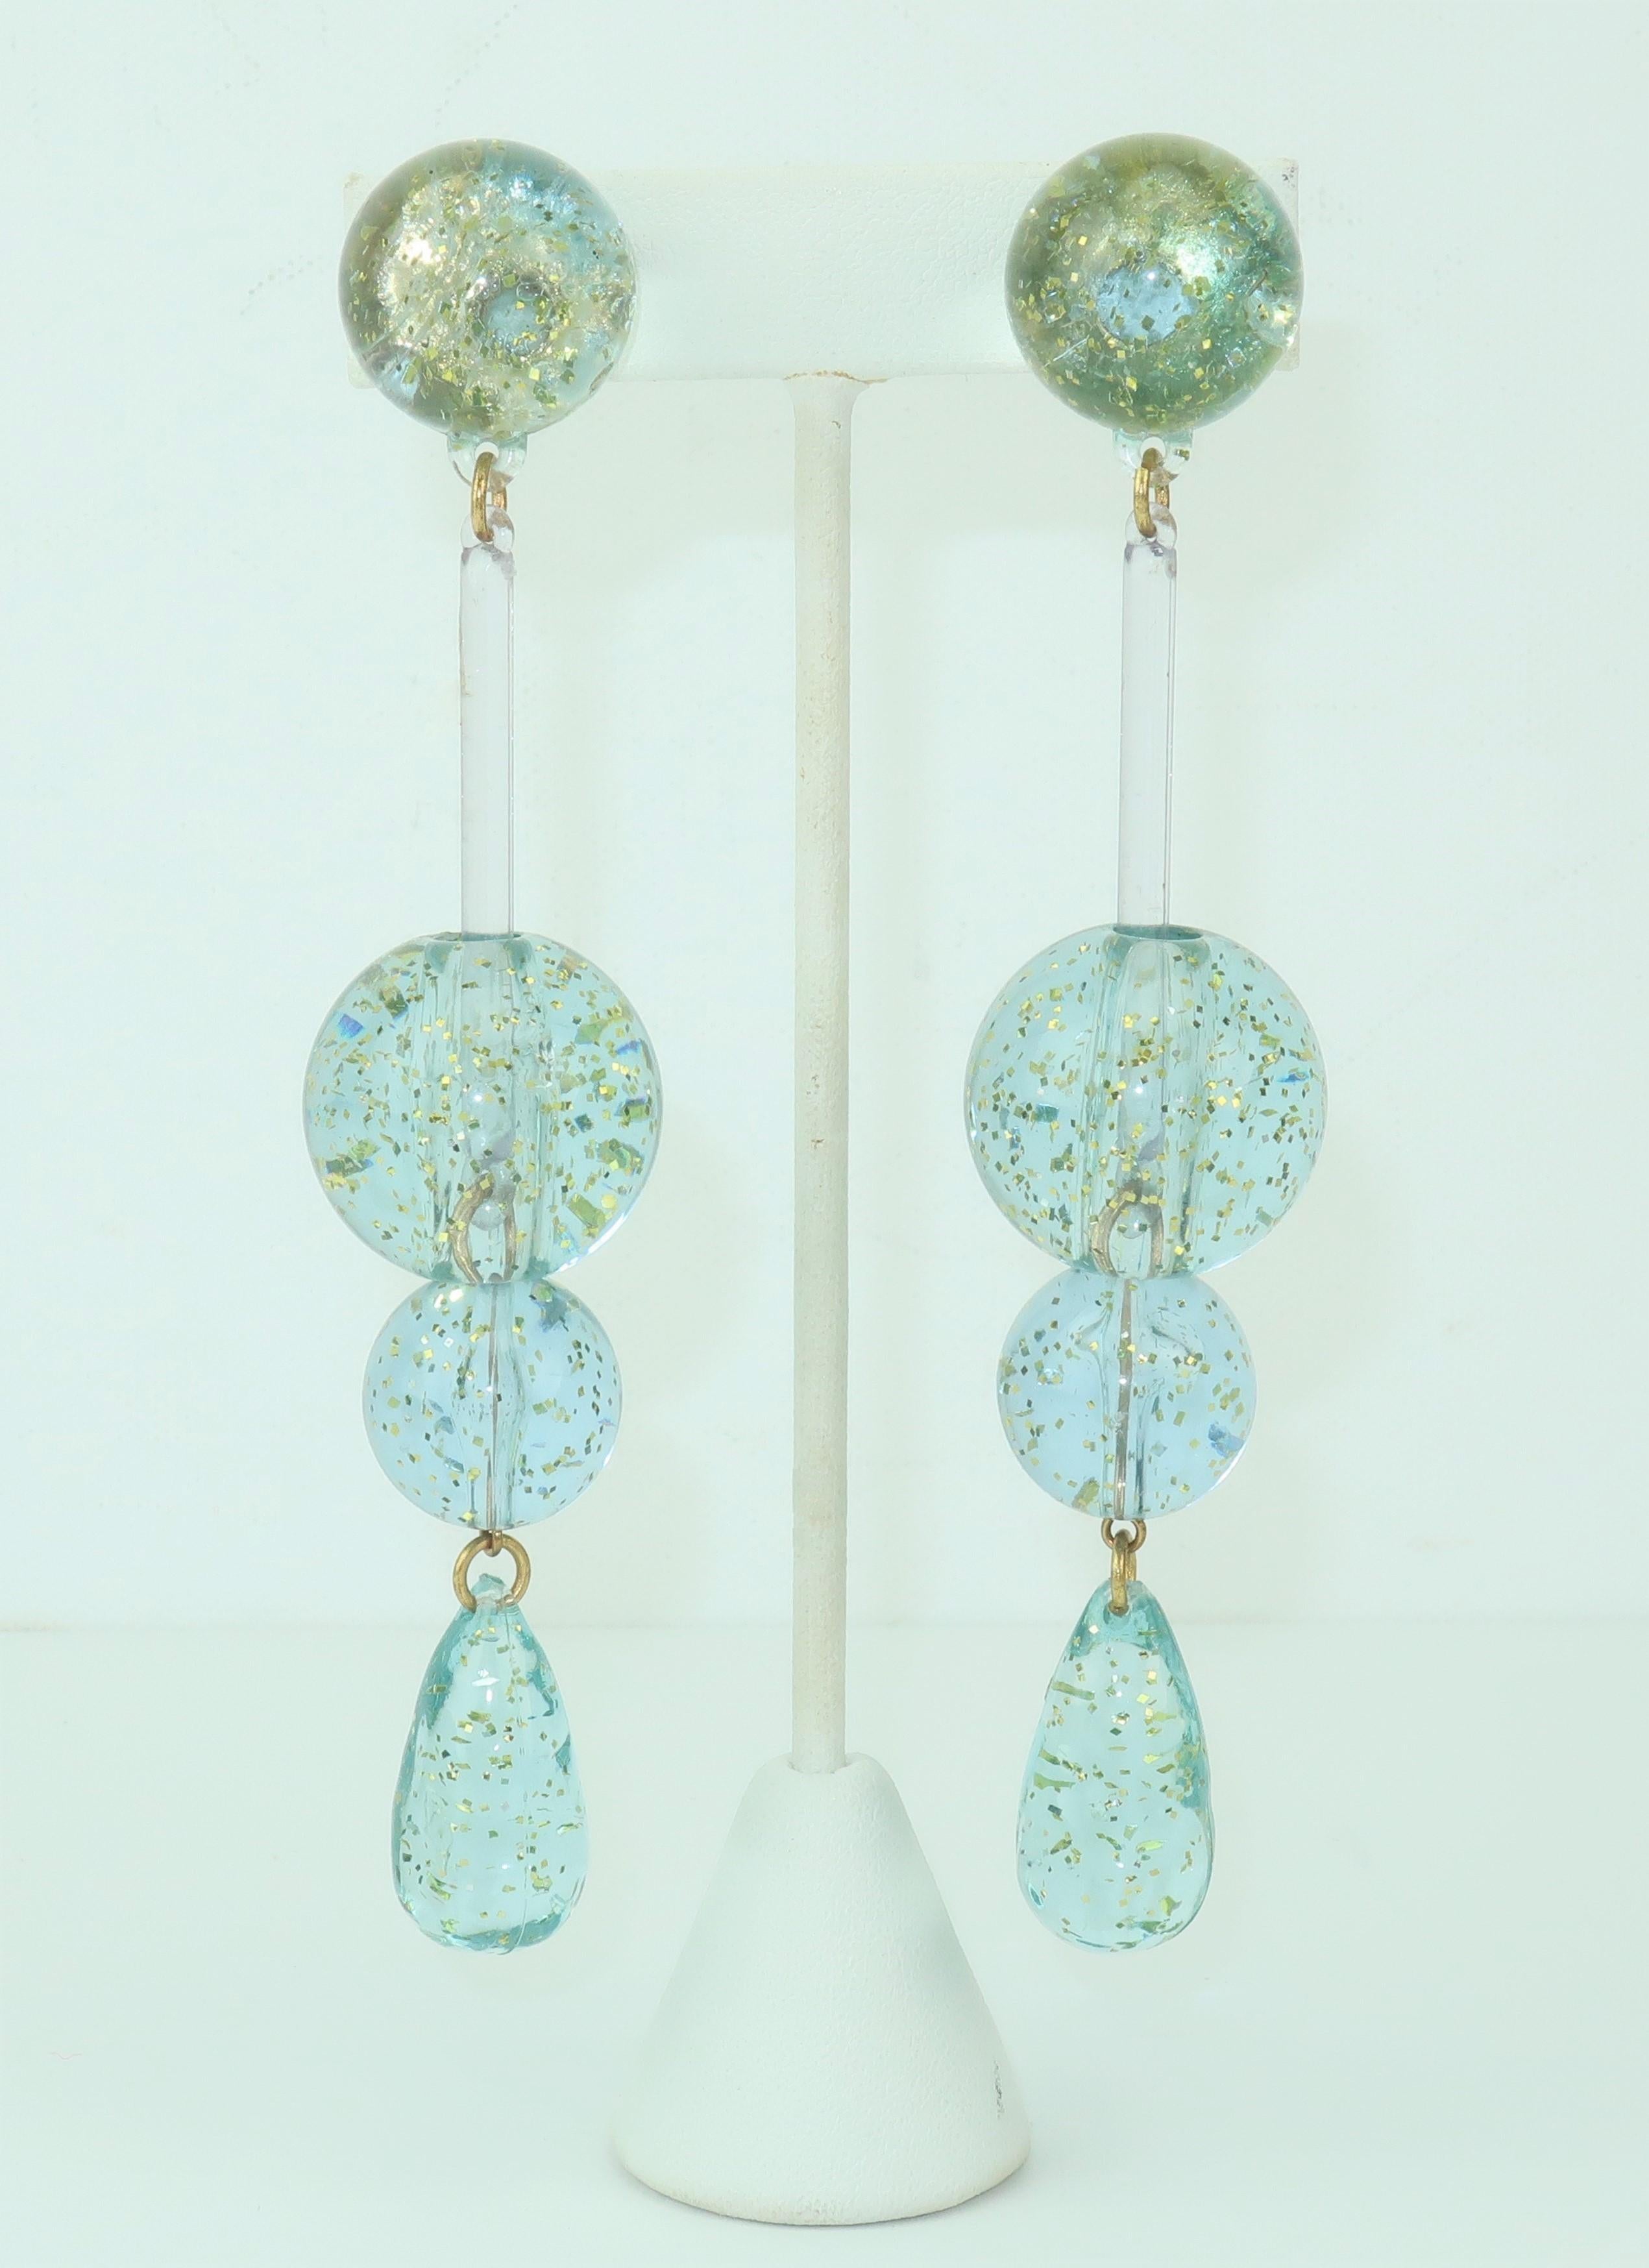 These 1960's acrylic drop earrings have a go-go girl look and a period perfect space age vibe.  Constructed with light ice blue orbs and teardrops highlighted with gold flecks and suspended from the clip on bases by clear rods and brass rings. 